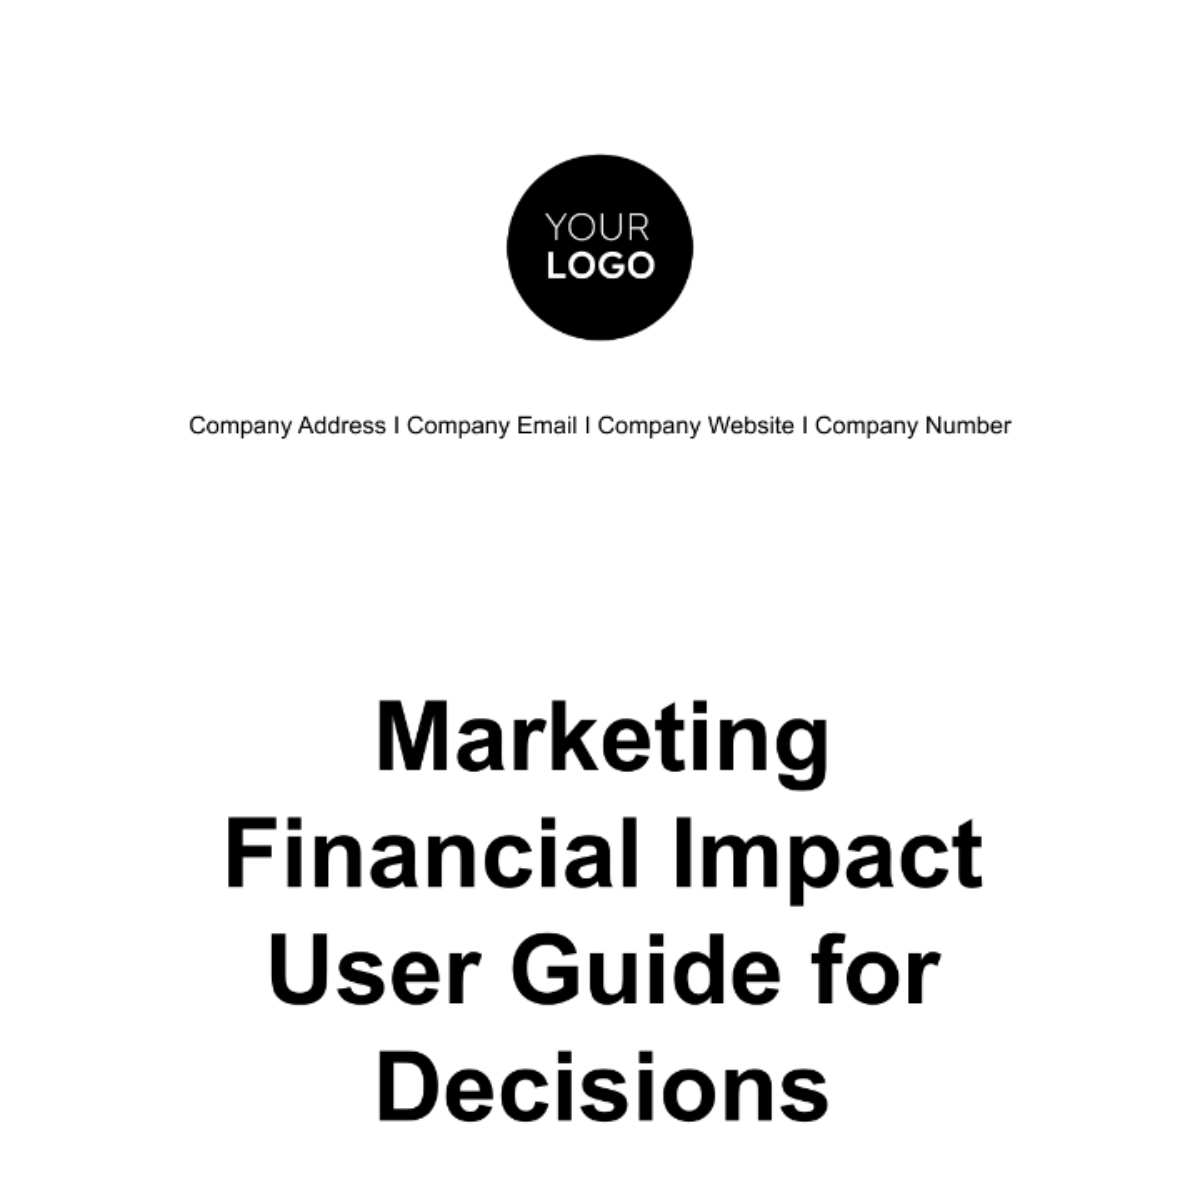 Marketing Financial Impact User Guide for Decisions Template